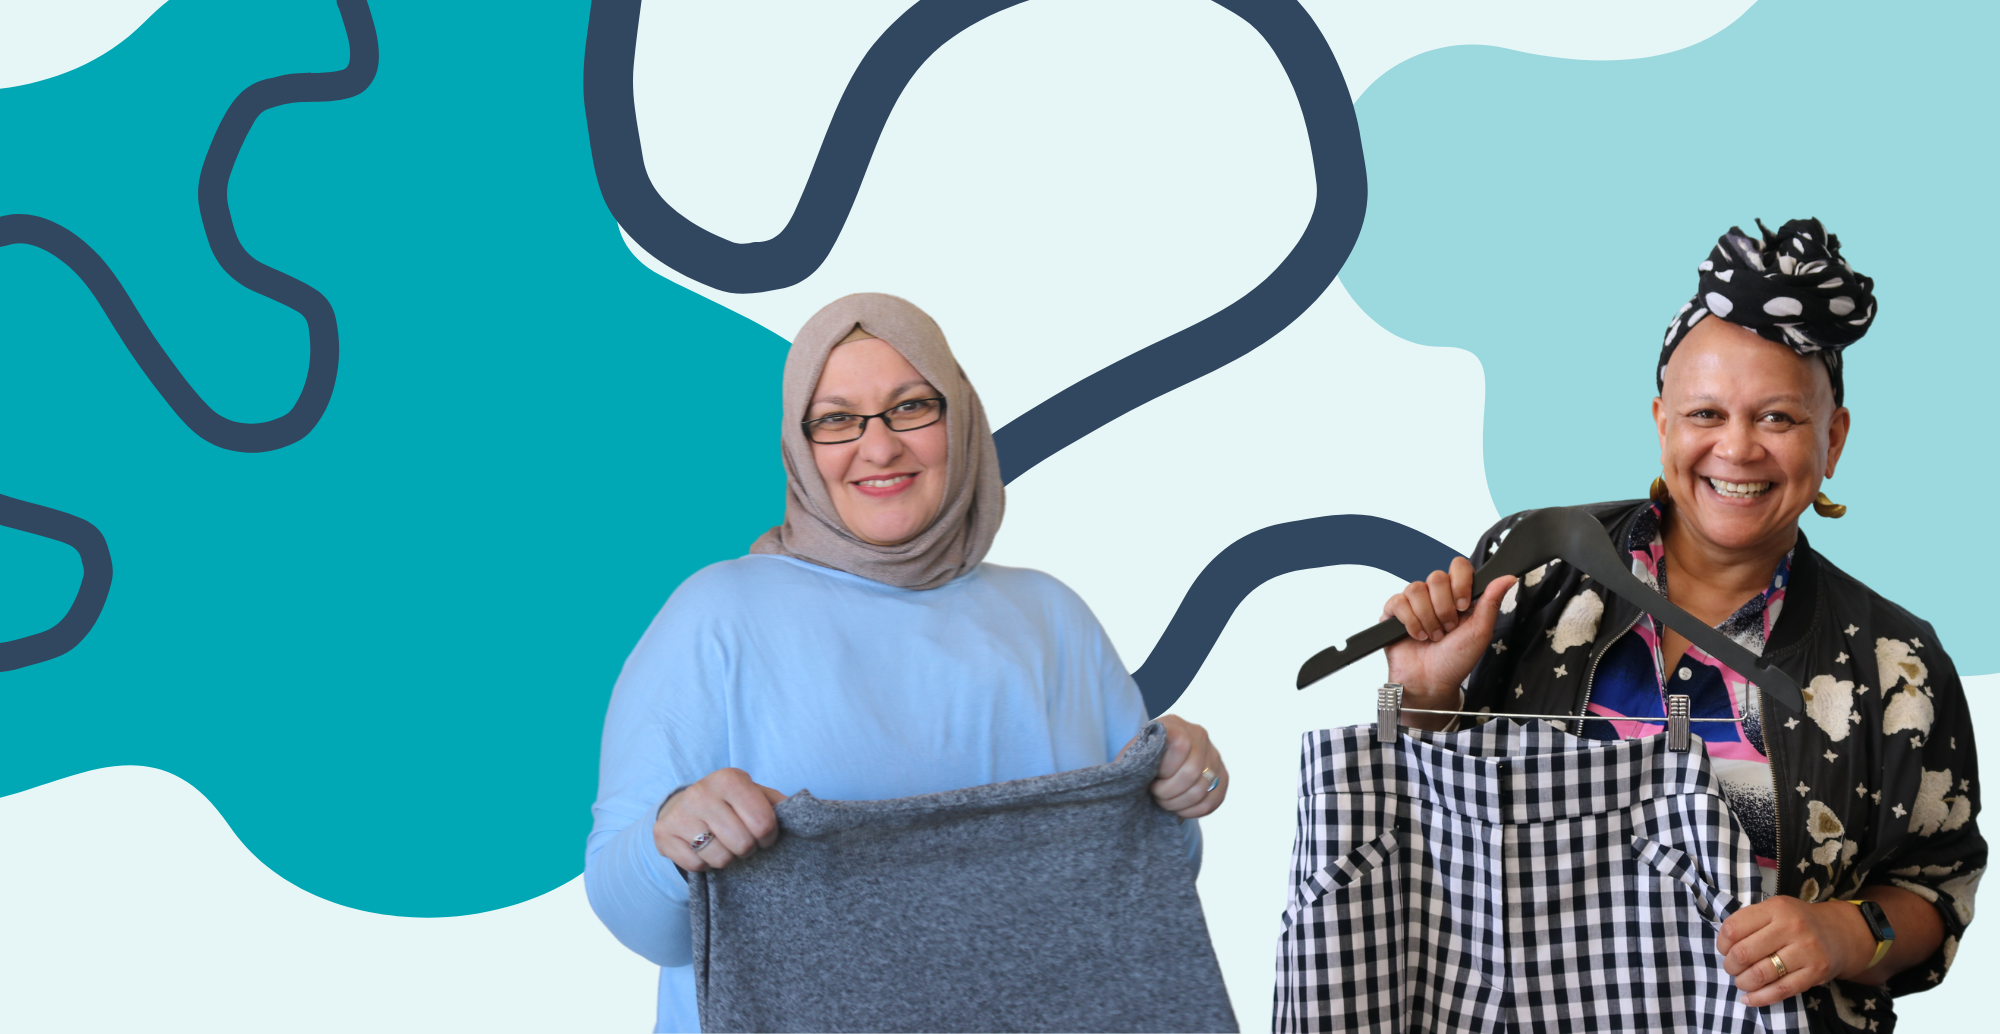 Two diverse women hold up clothing items in front of a decorative teal background